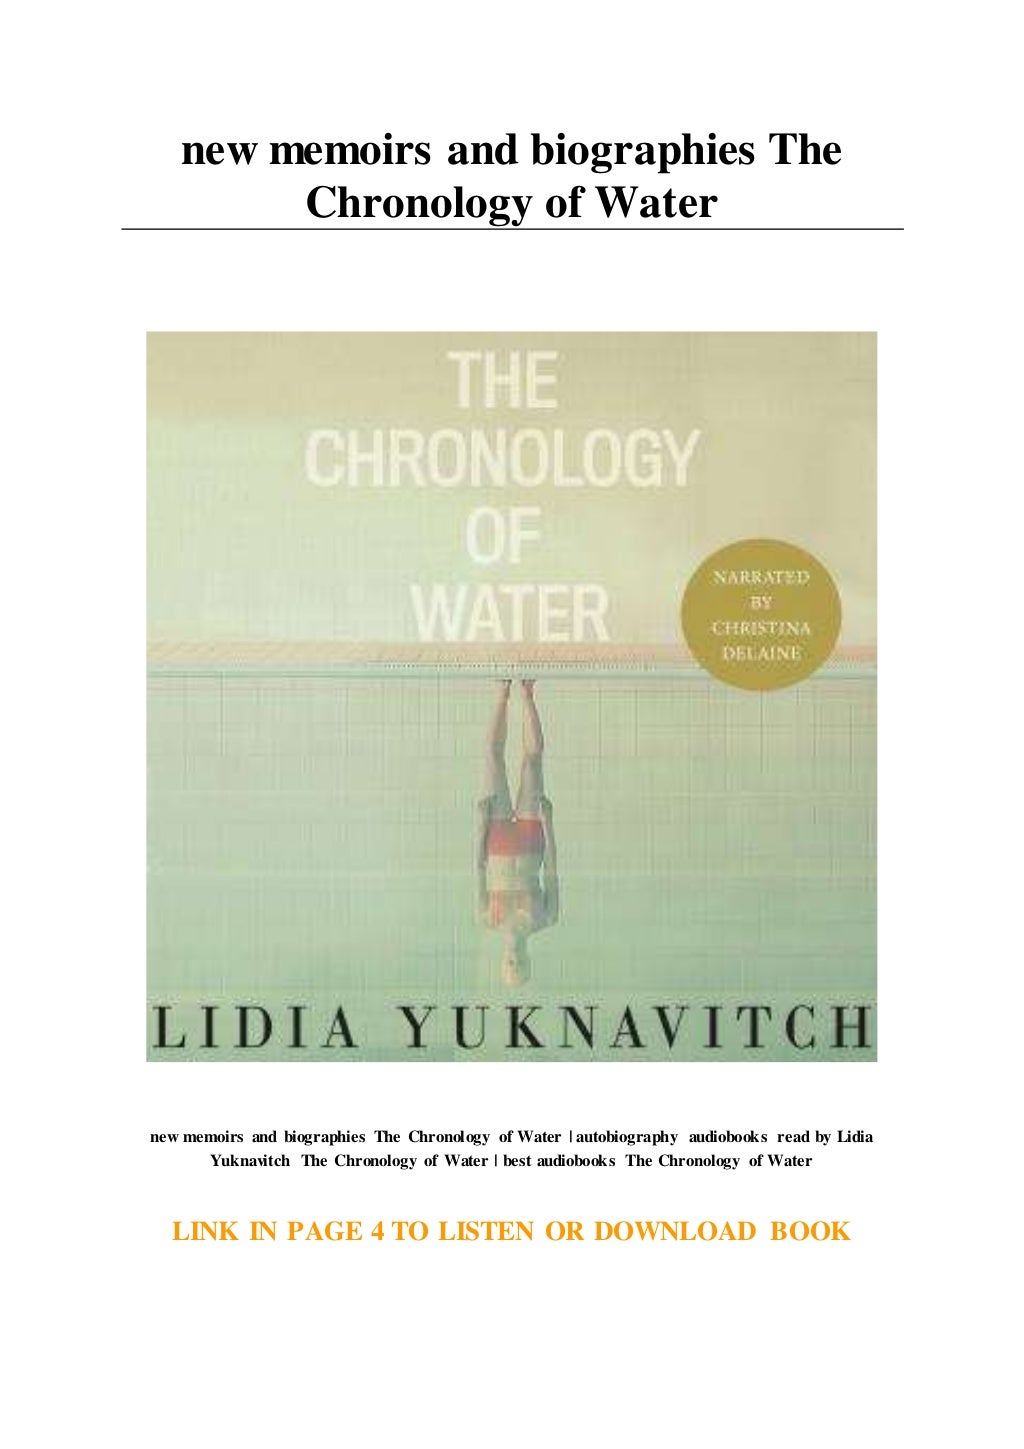 new memoirs and biographies The Chronology of Water